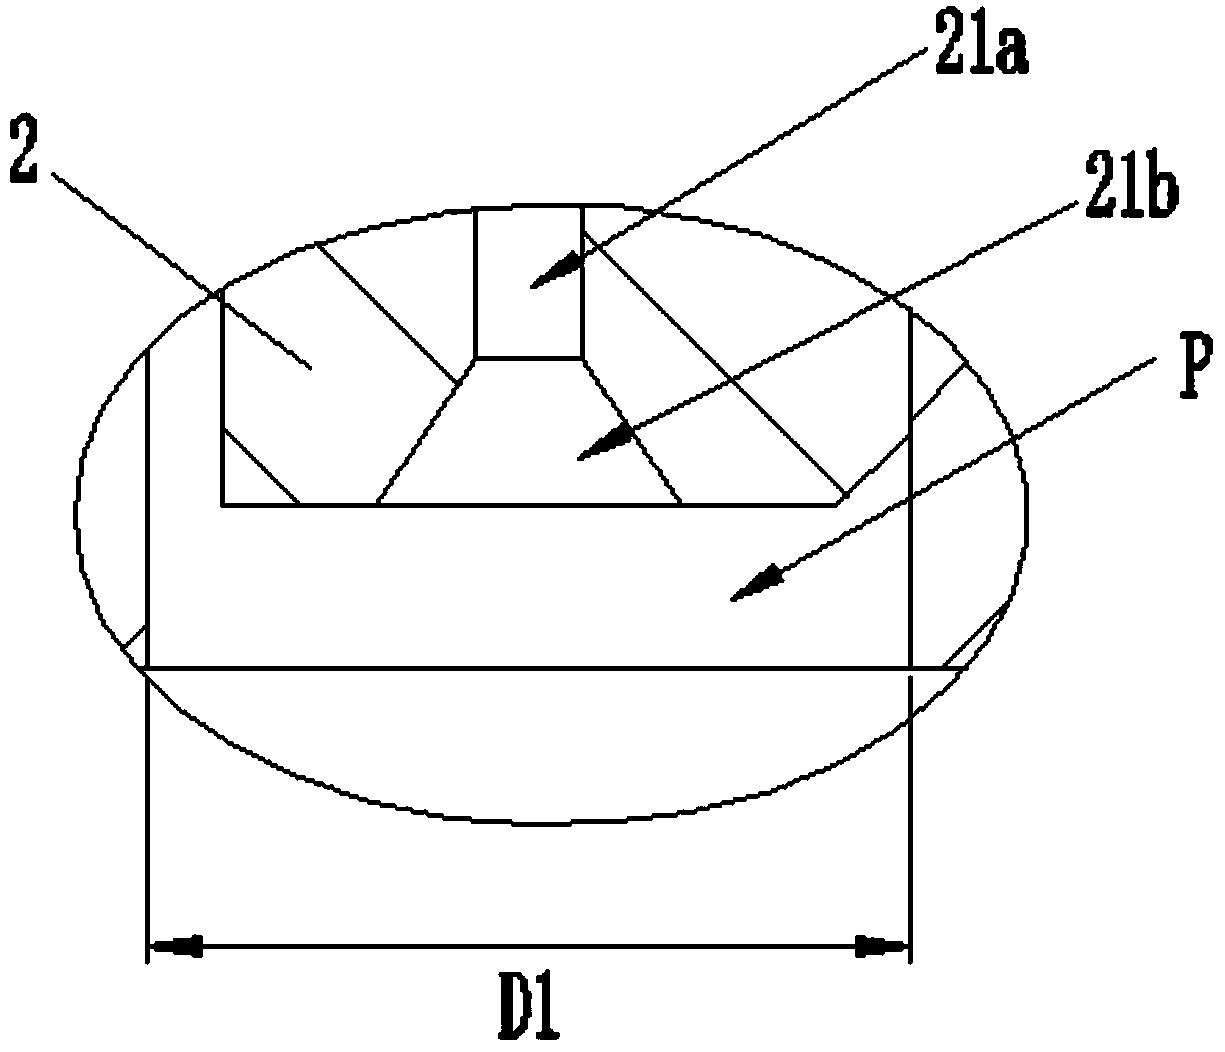 High-damping direct-acting-type overflow valve